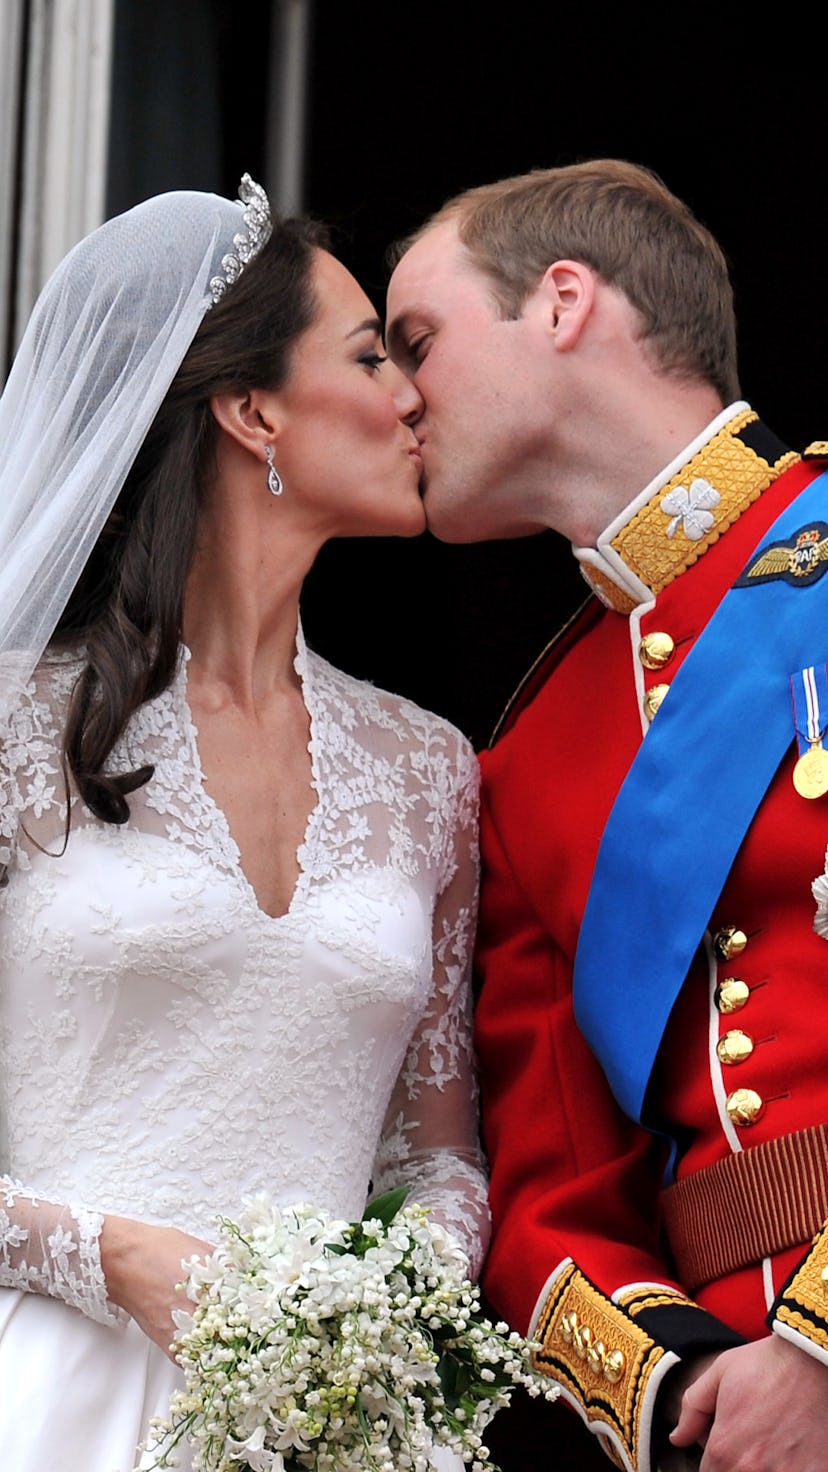 Prince William and his wife Kate Middleton, who has been given the title of The Duchess of Cambridge...